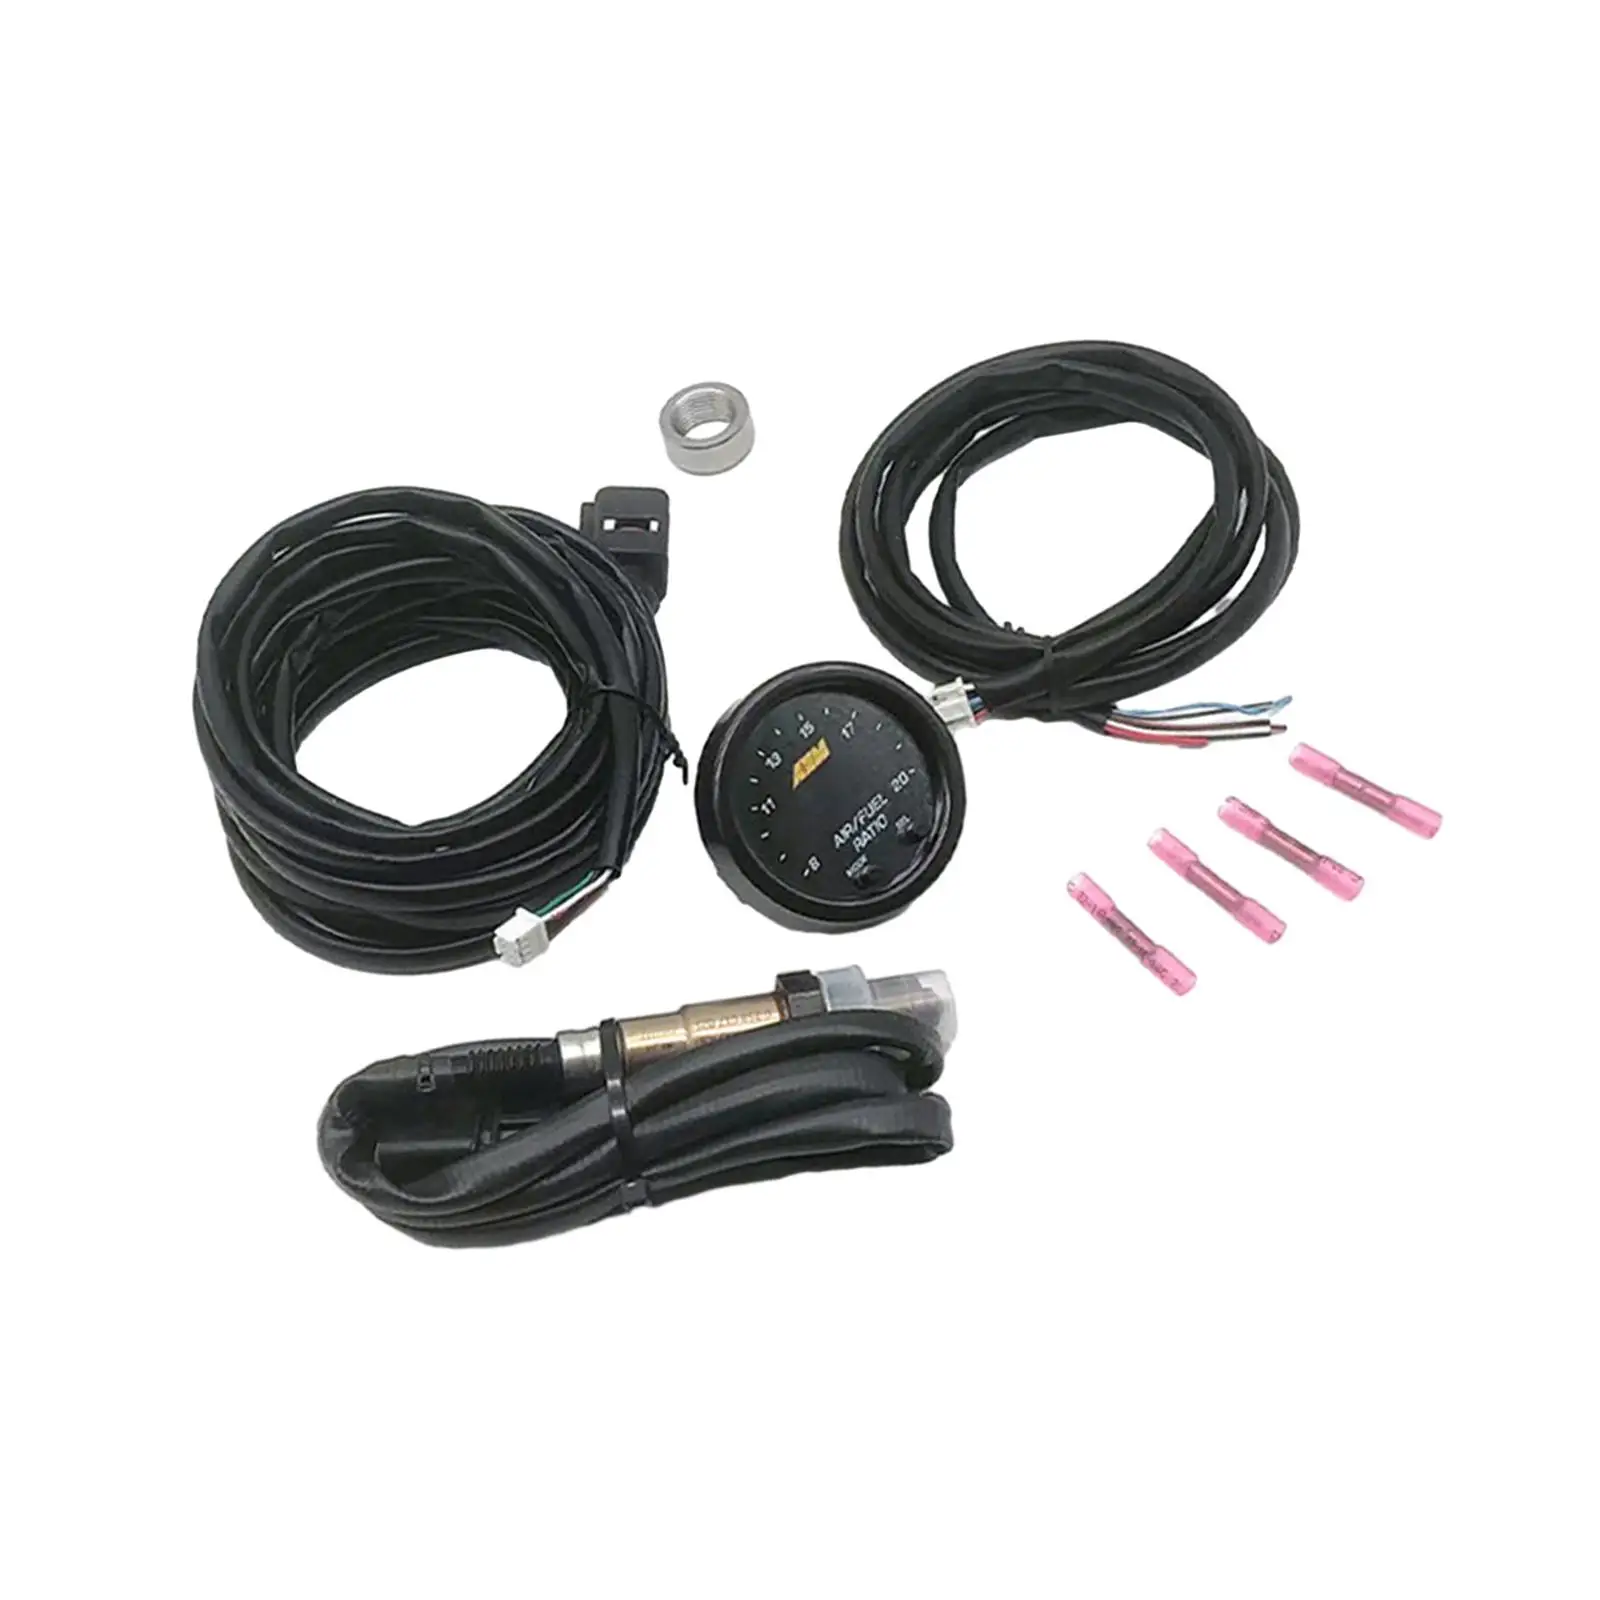 Air Fuel Controller Gauge Set 30-0300 for x Series Wideband Gauge Repair Parts Durable Easy to Install Assembly Car Accessories